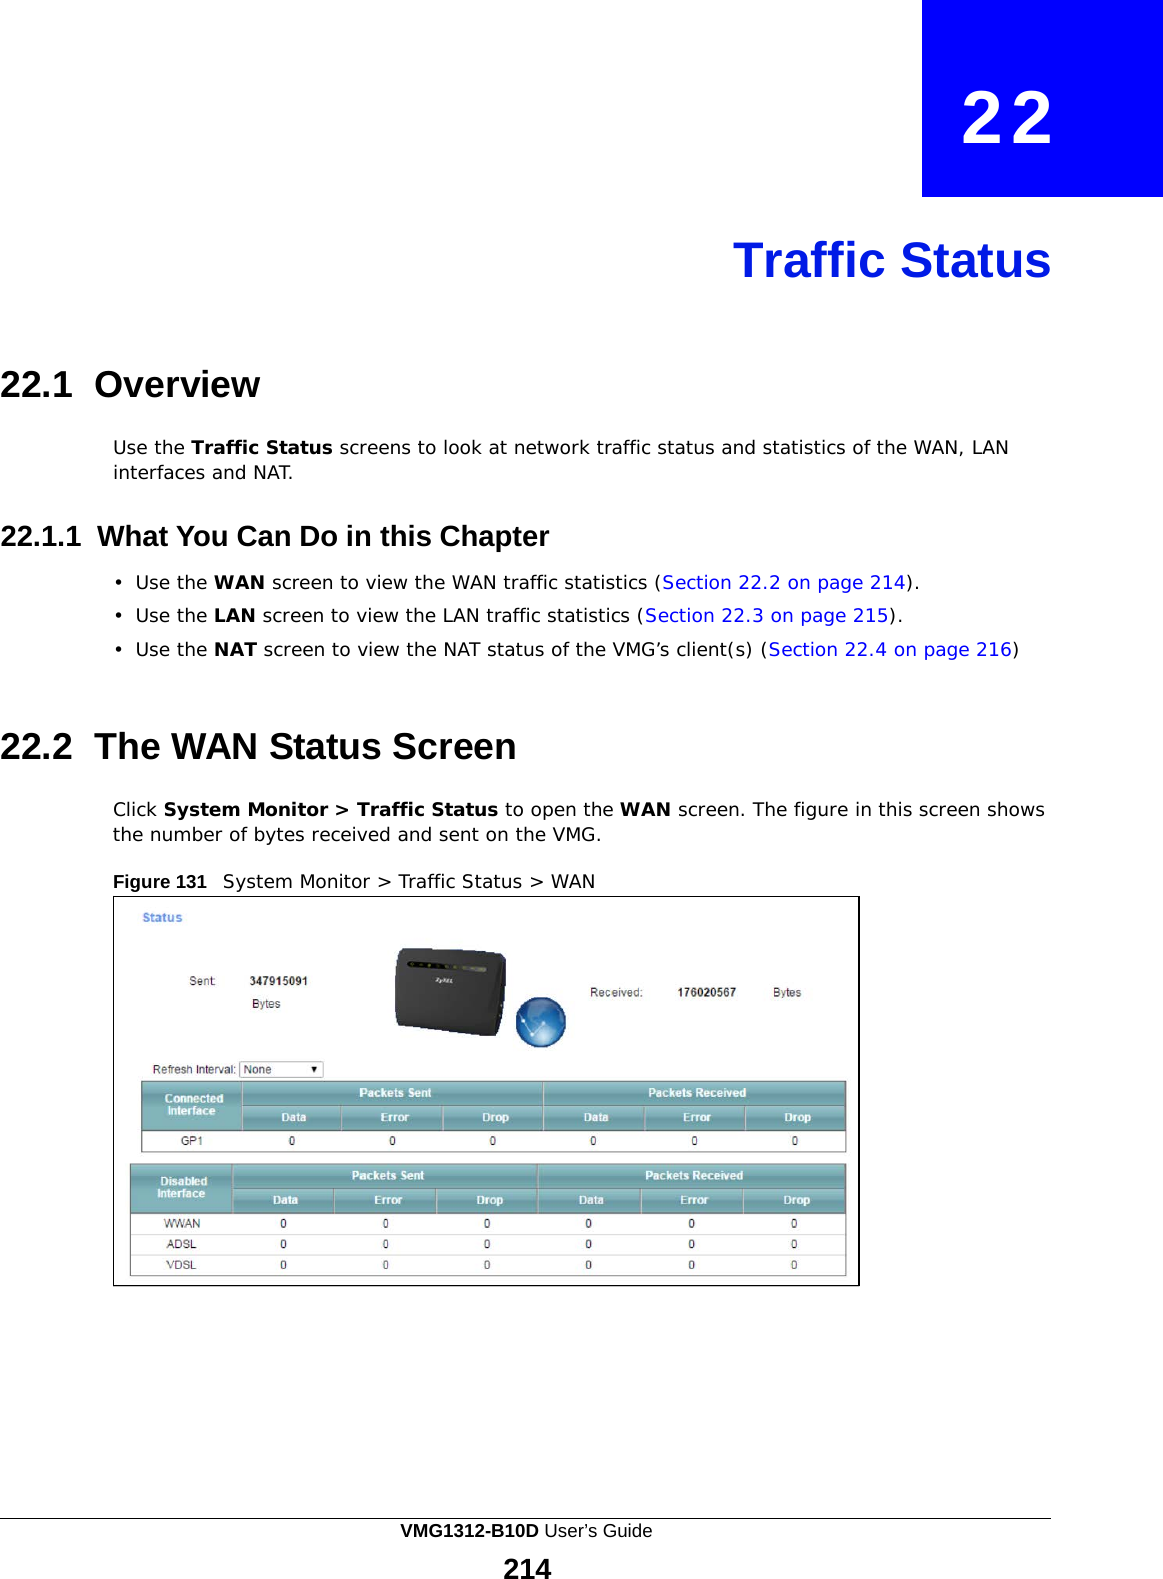    22     Traffic Status     22.1 Overview  Use the Traffic Status screens to look at network traffic status and statistics of the WAN, LAN interfaces and NAT.   22.1.1 What You Can Do in this Chapter  •  Use the WAN screen to view the WAN traffic statistics (Section 22.2 on page 214).  •  Use the LAN screen to view the LAN traffic statistics (Section 22.3 on page 215).  •  Use the NAT screen to view the NAT status of the VMG’s client(s) (Section 22.4 on page 216)    22.2 The WAN Status Screen  Click System Monitor &gt; Traffic Status to open the WAN screen. The figure in this screen shows the number of bytes received and sent on the VMG.  Figure 131   System Monitor &gt; Traffic Status &gt; WAN VMG1312-B10D User’s Guide 214  